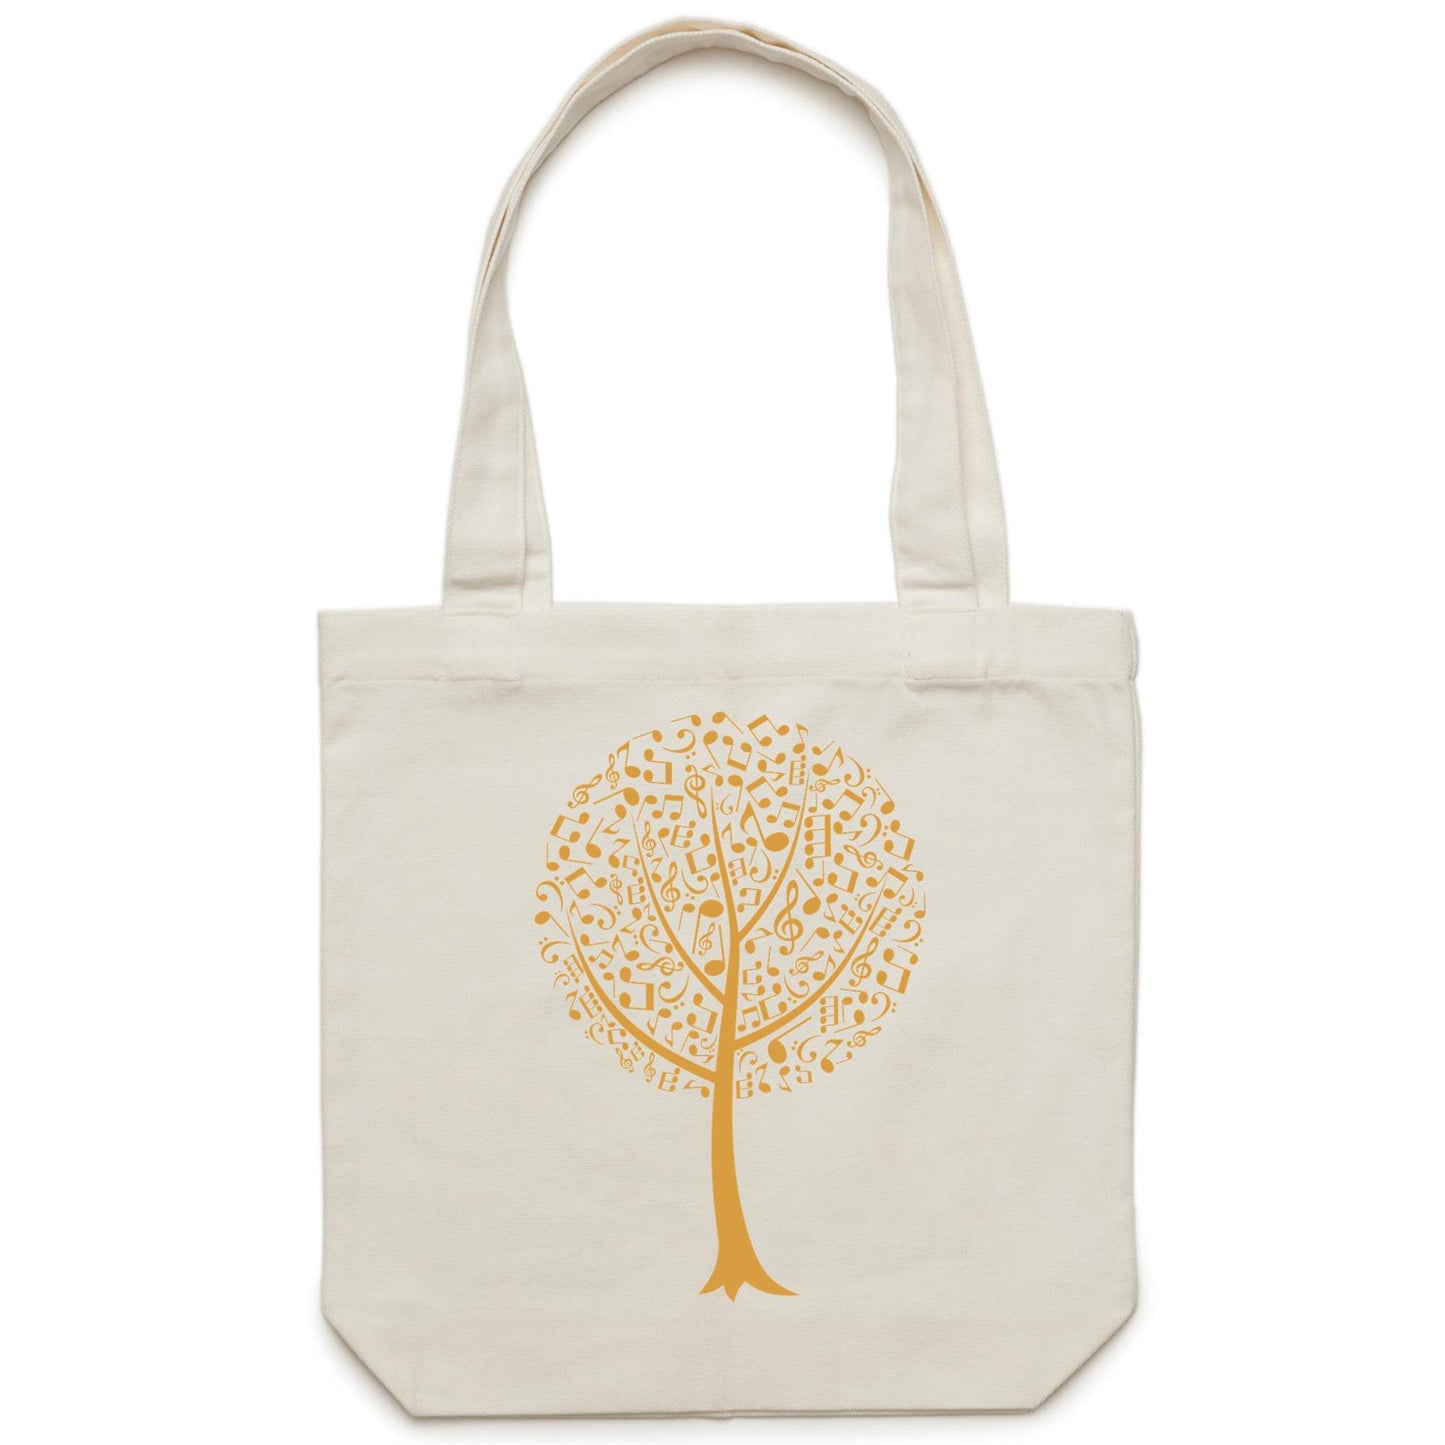 Music Tree - Canvas Tote Bag Cream One-Size Tote Bag Music Plants